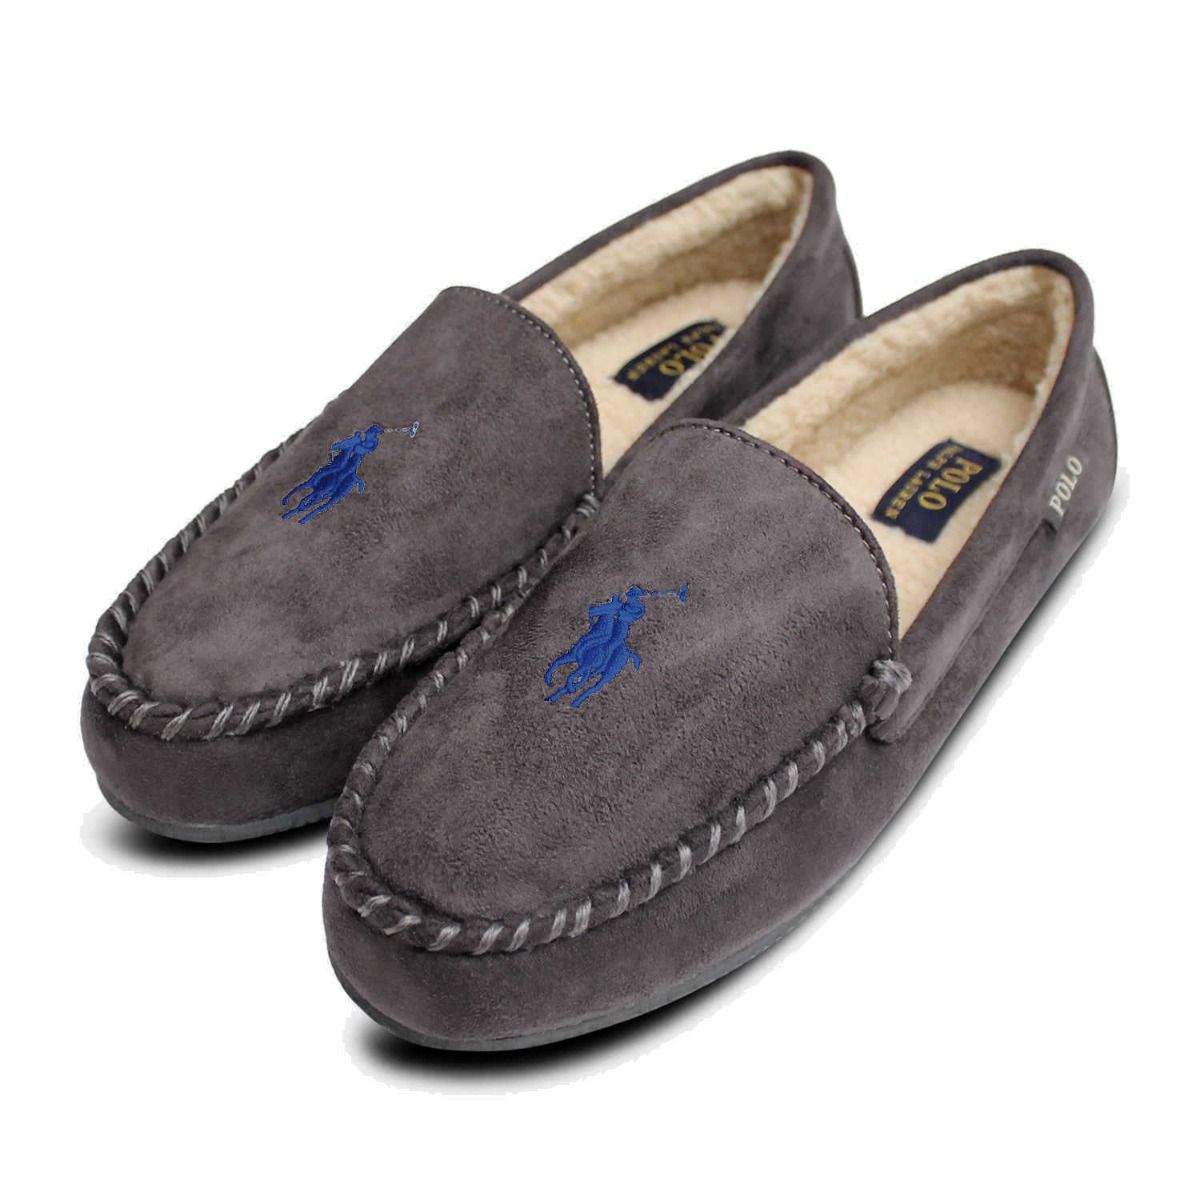 Ralph Lauren Polo Mens Slippers in Grey with Warm Fur Lining